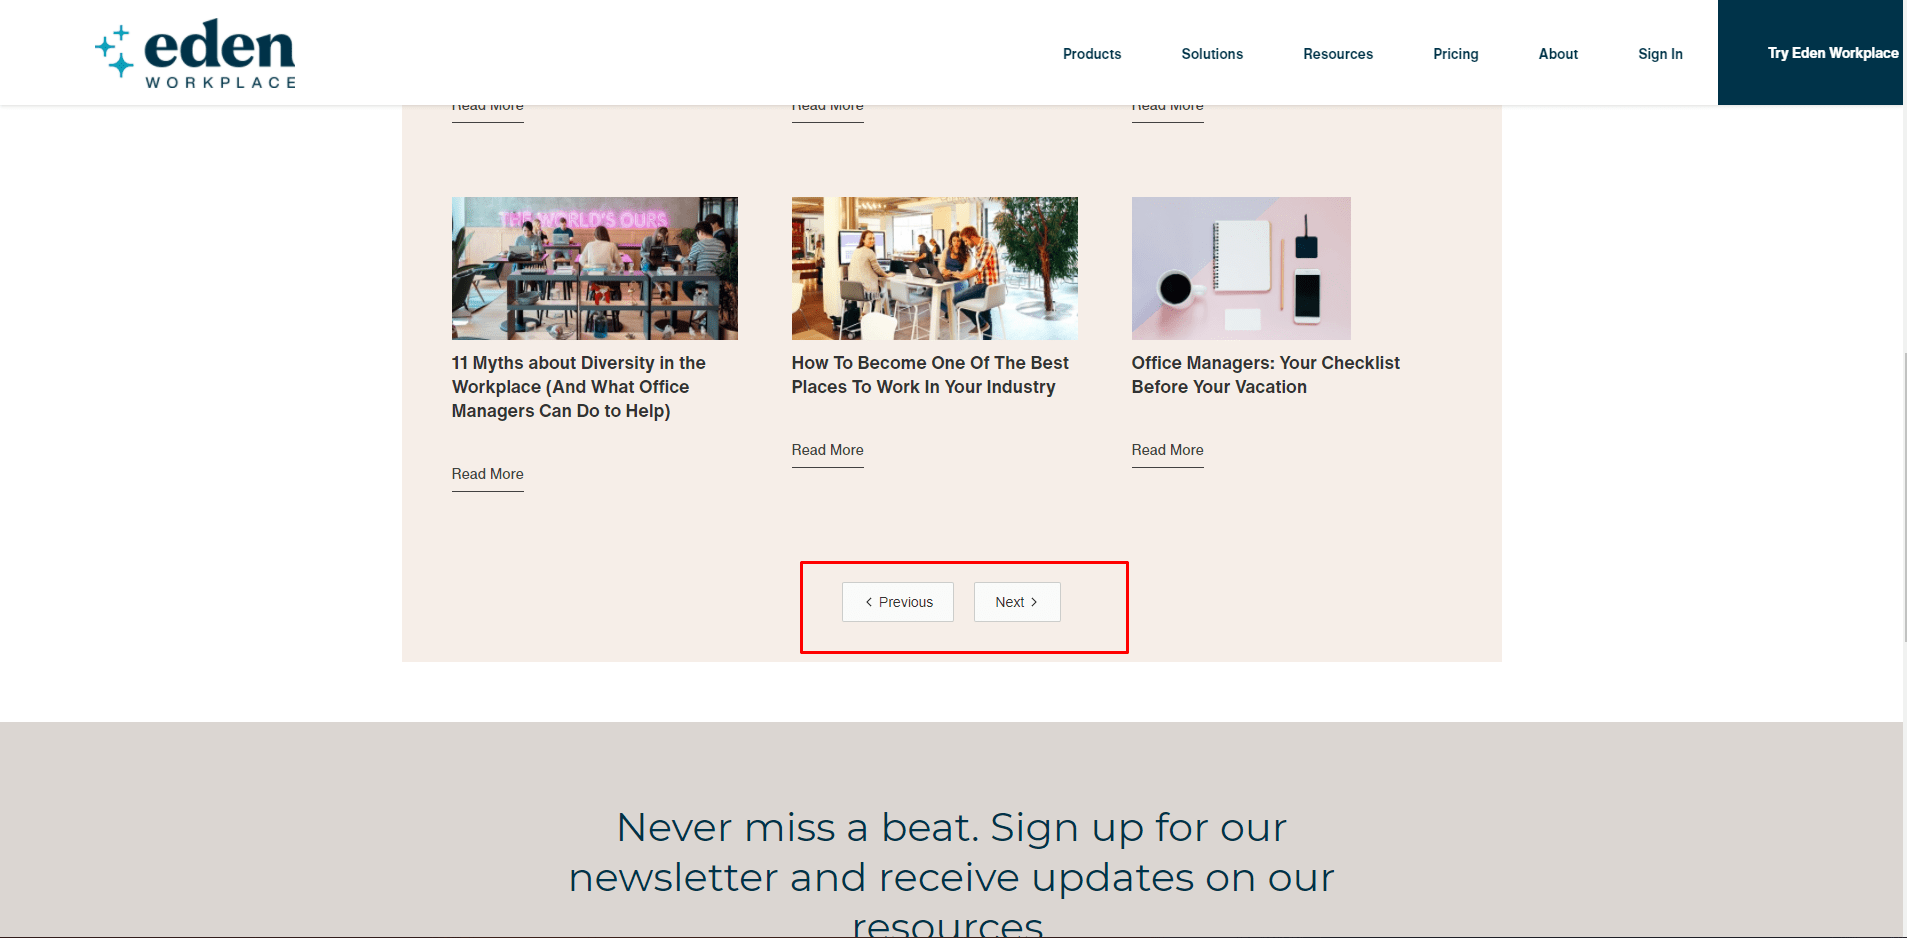 The ‘Previous/Next’ button size is not the same on the ‘Blog’ page